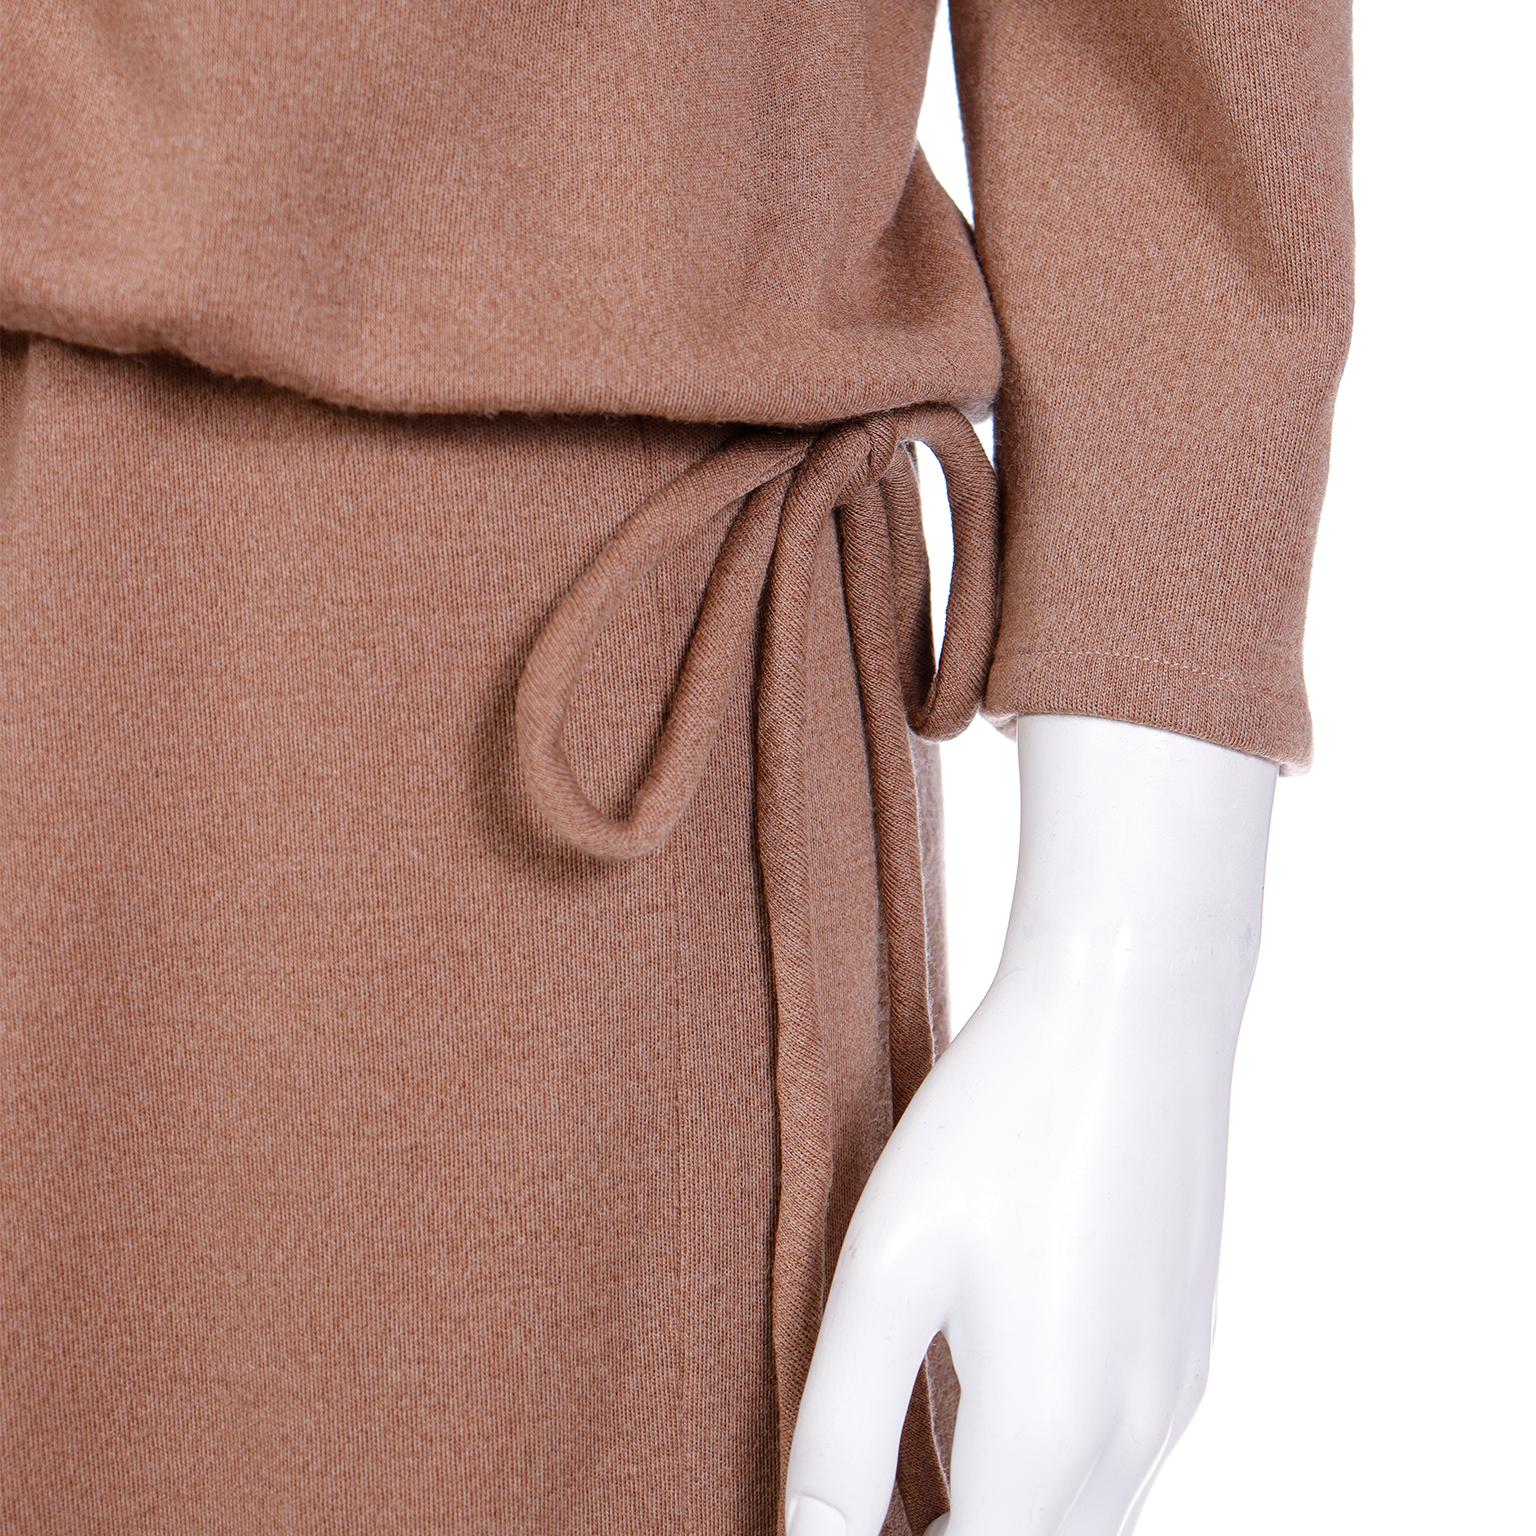 1970s Vintage Bill Blass 2Pc Camel Knit Outfit With Drawstring Top & Skirt 3